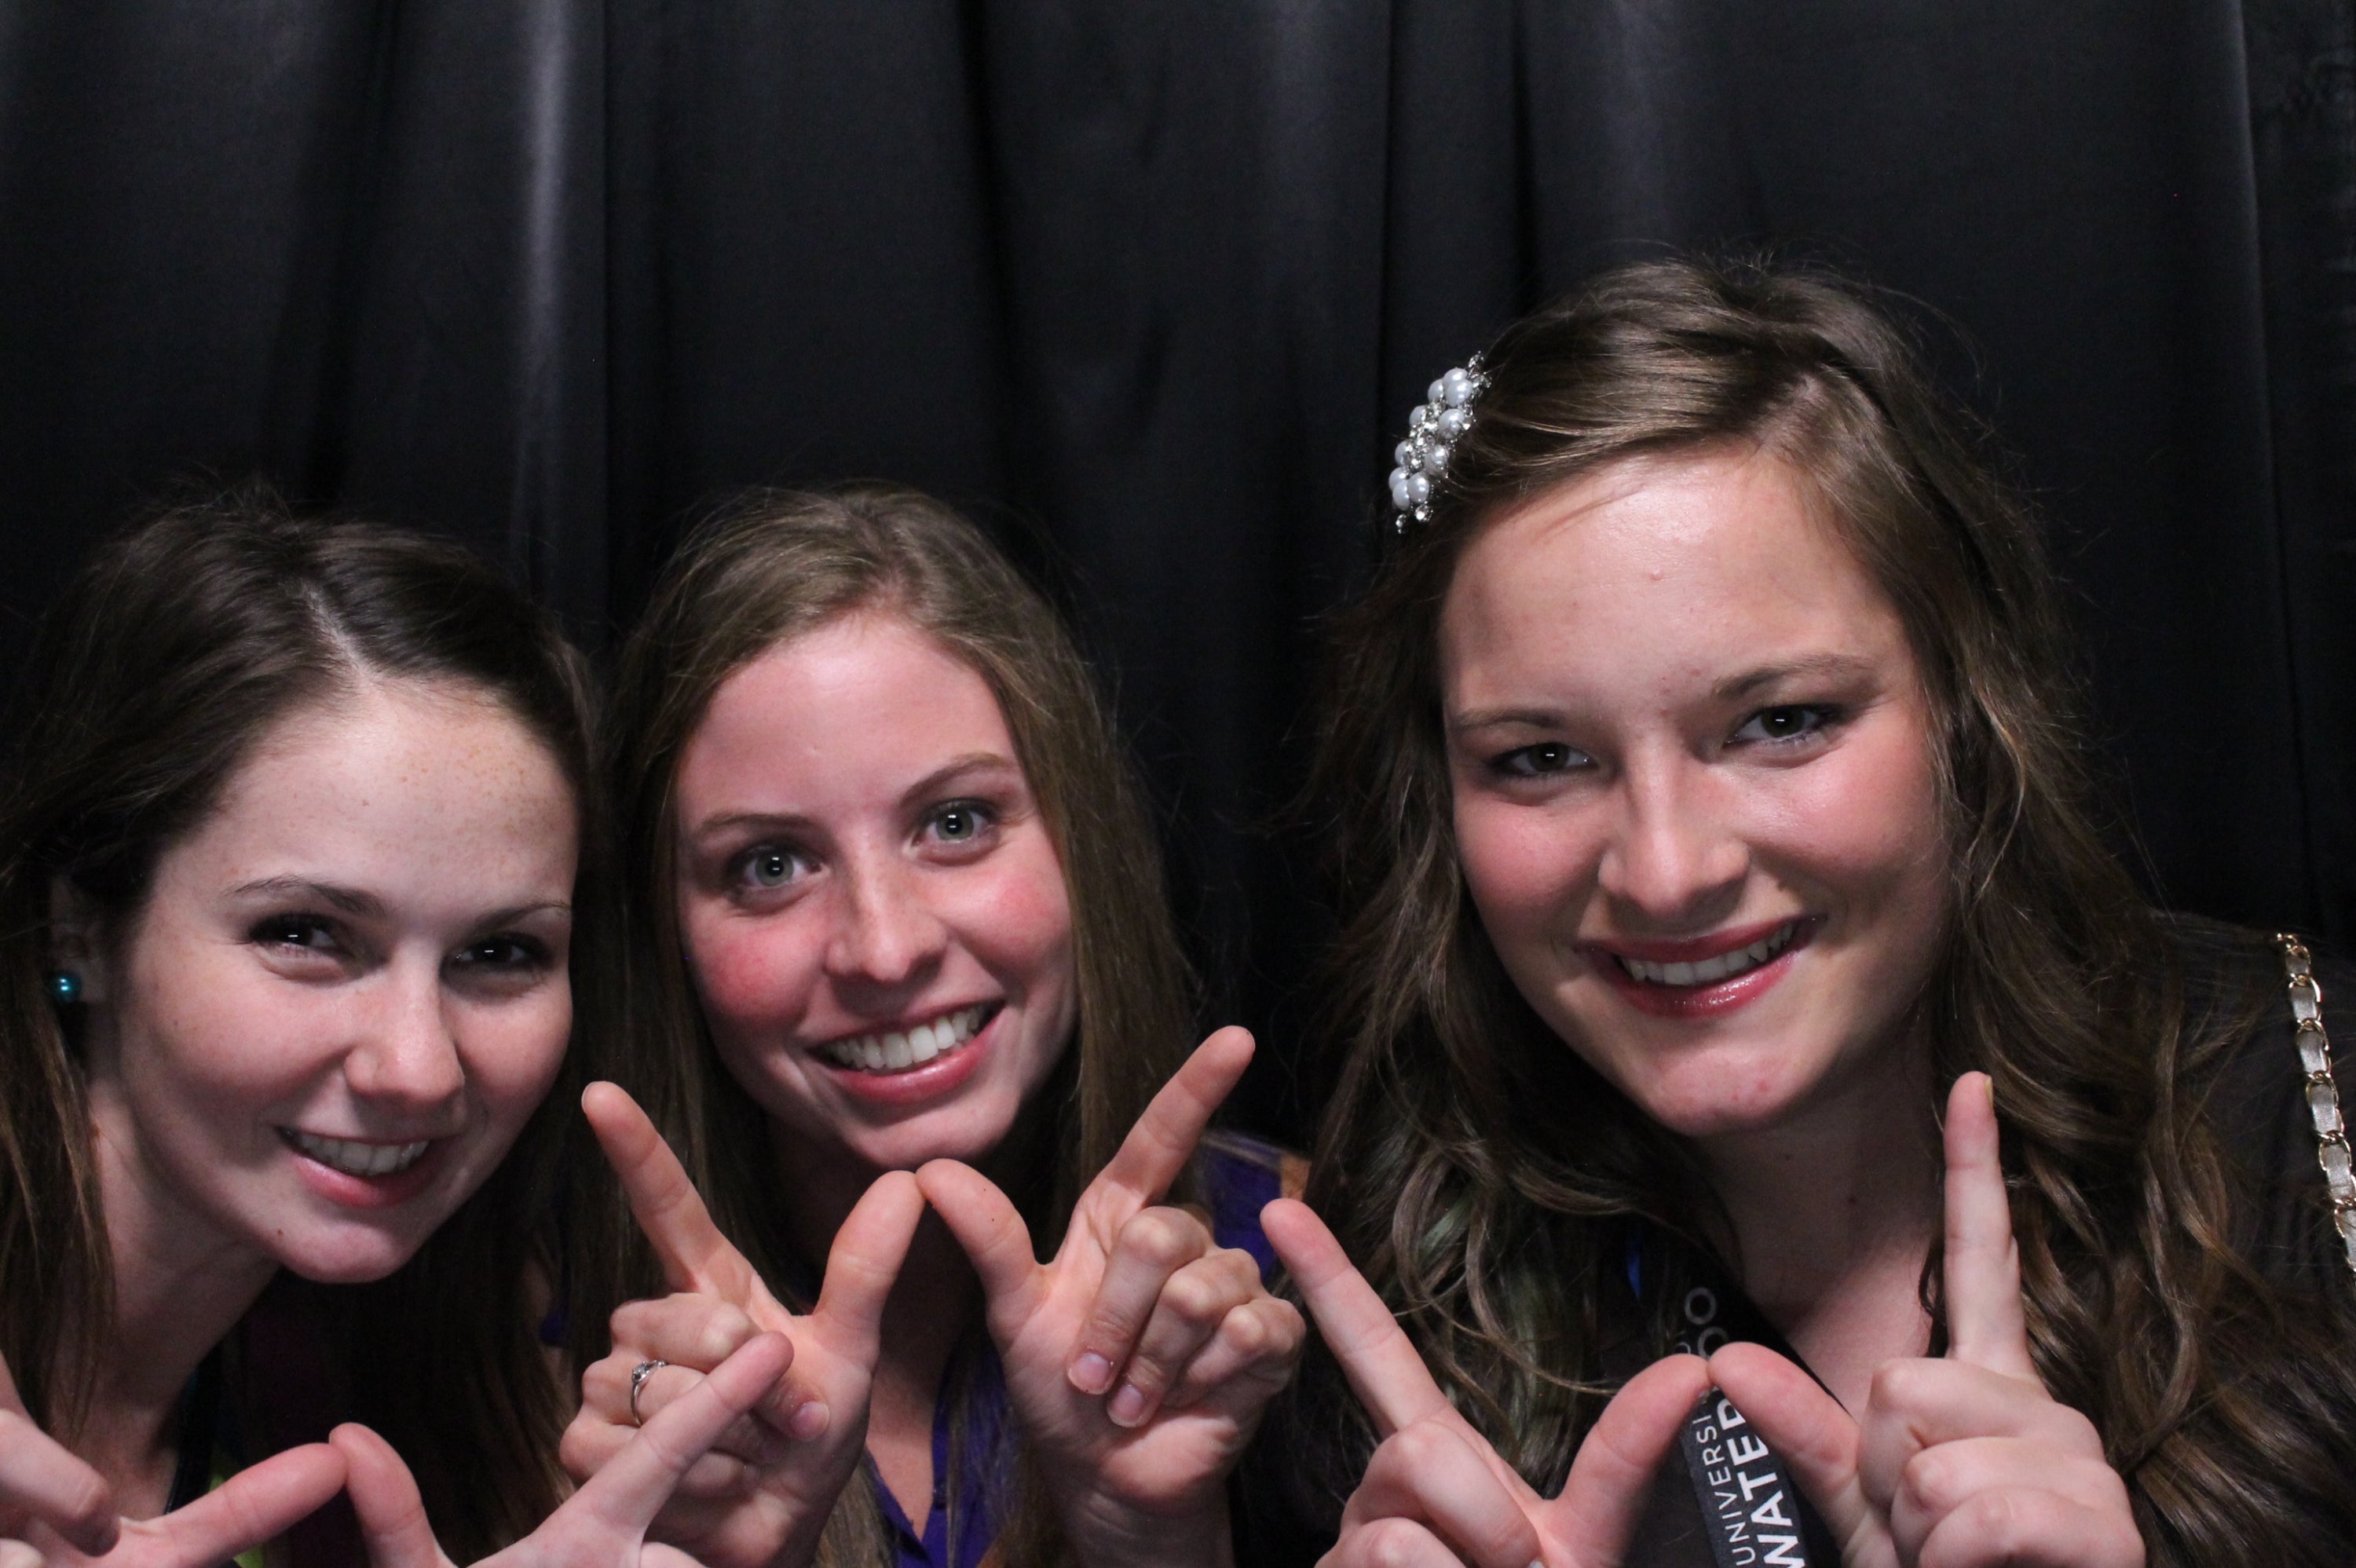 Three ladies posing for a photo while making a W with their hands.